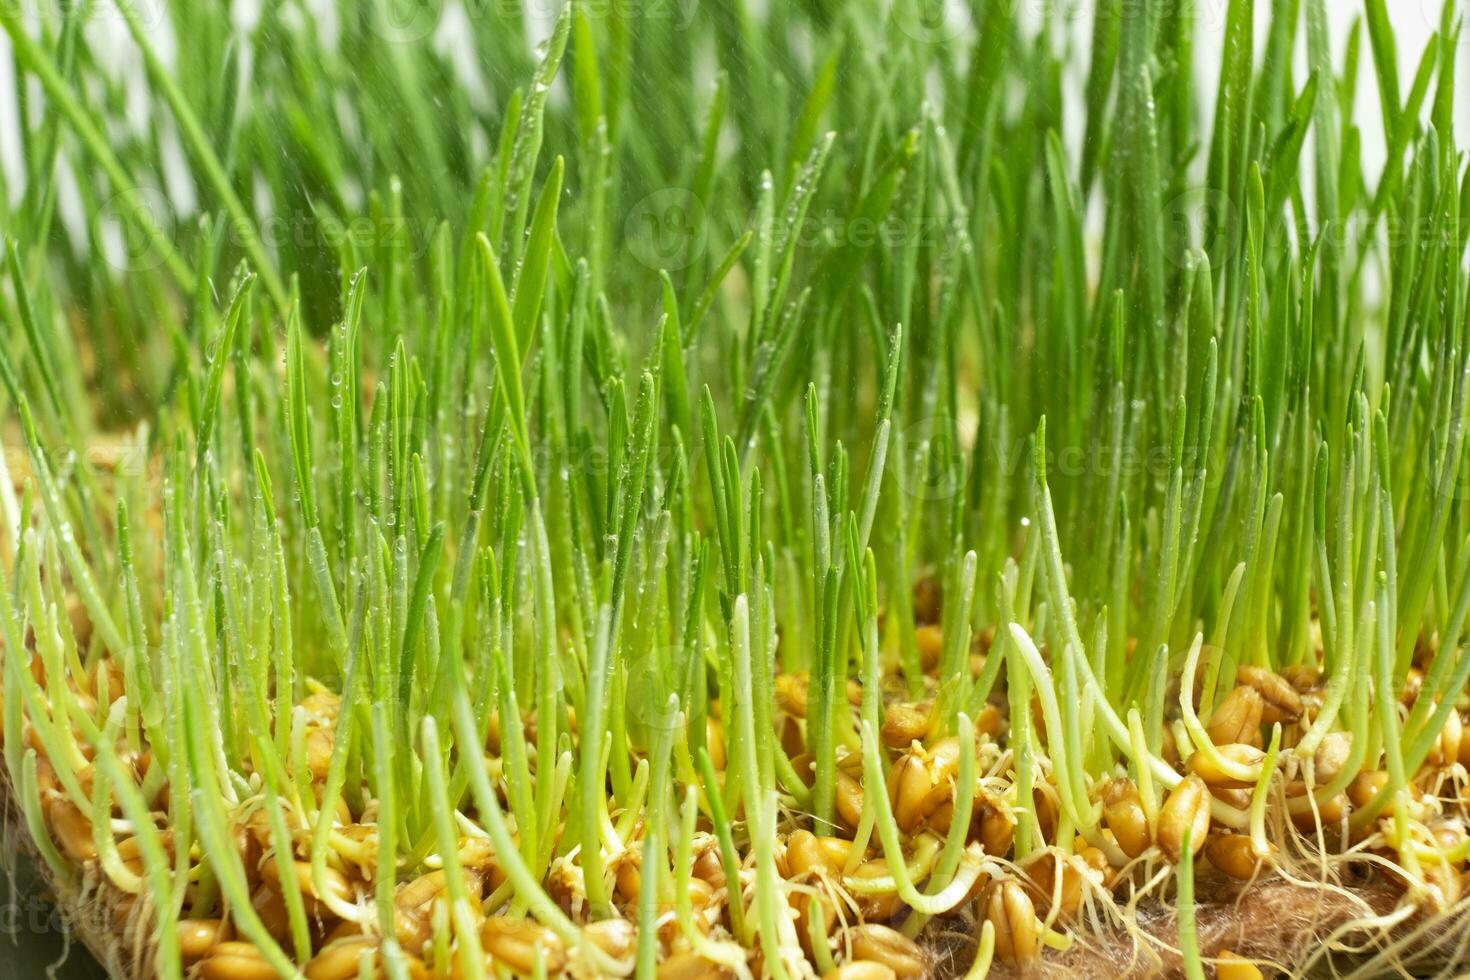 Sprouted wheat microgreens with drops of water. Macro photo